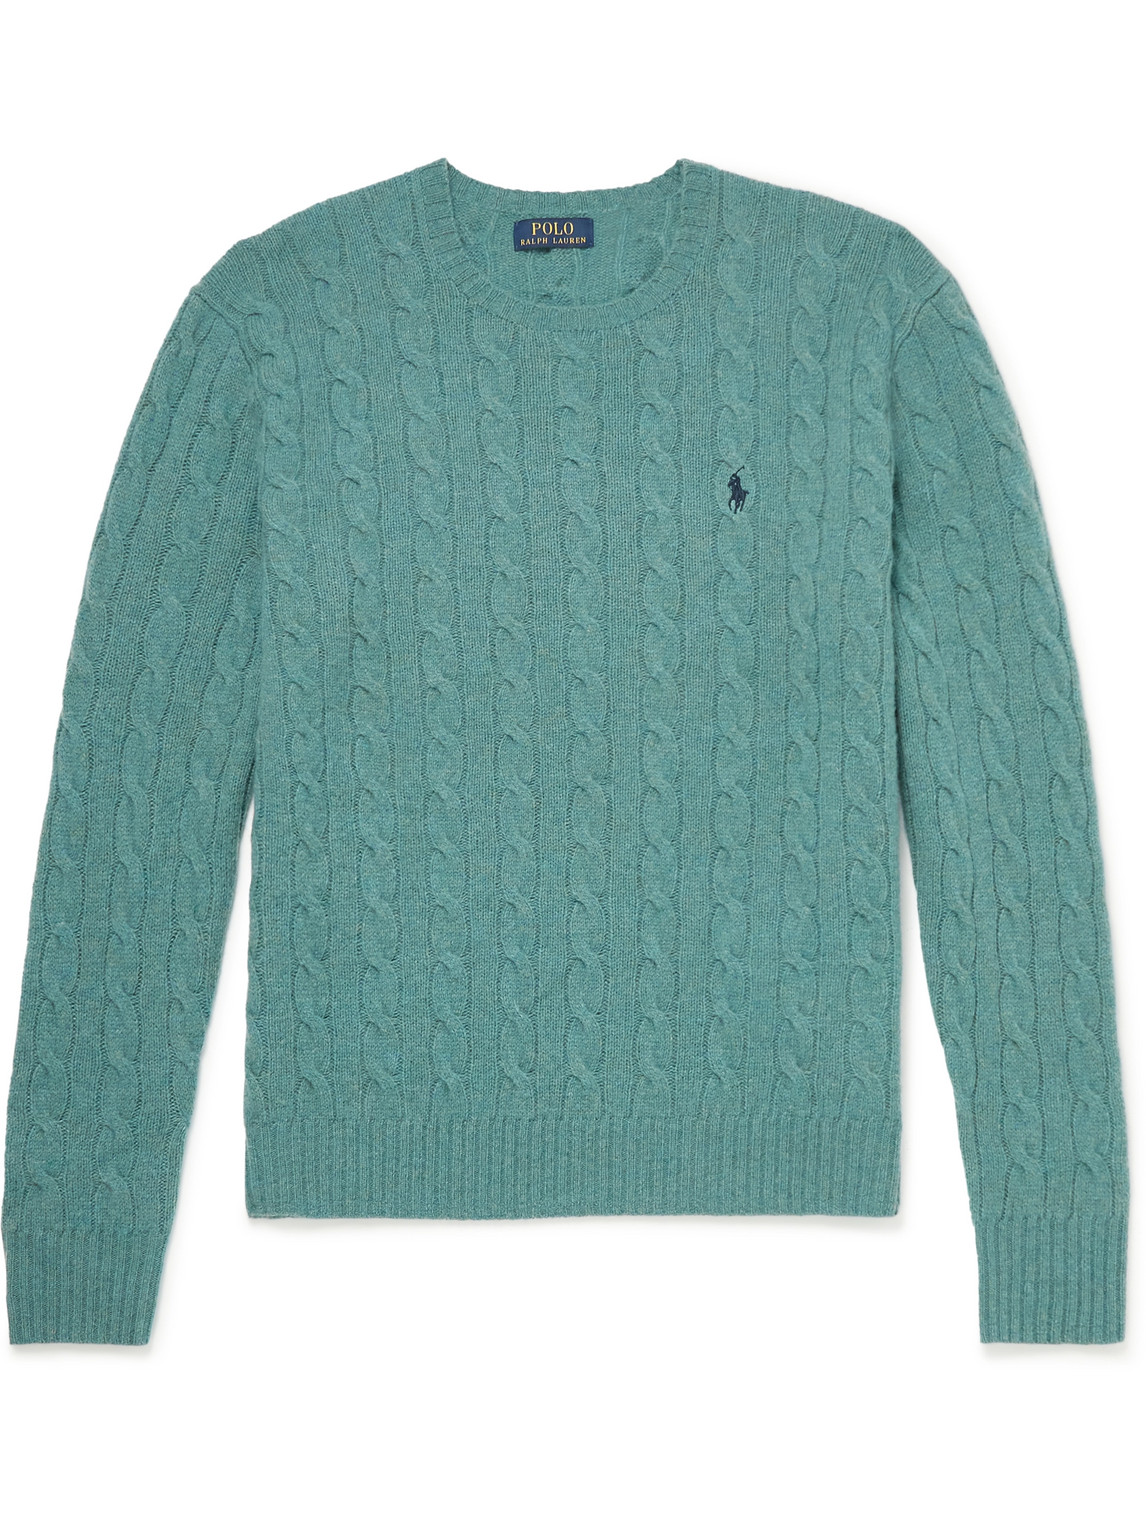 POLO RALPH LAUREN CABLE-KNIT WOOL AND CASHMERE-BLEND SWEATER